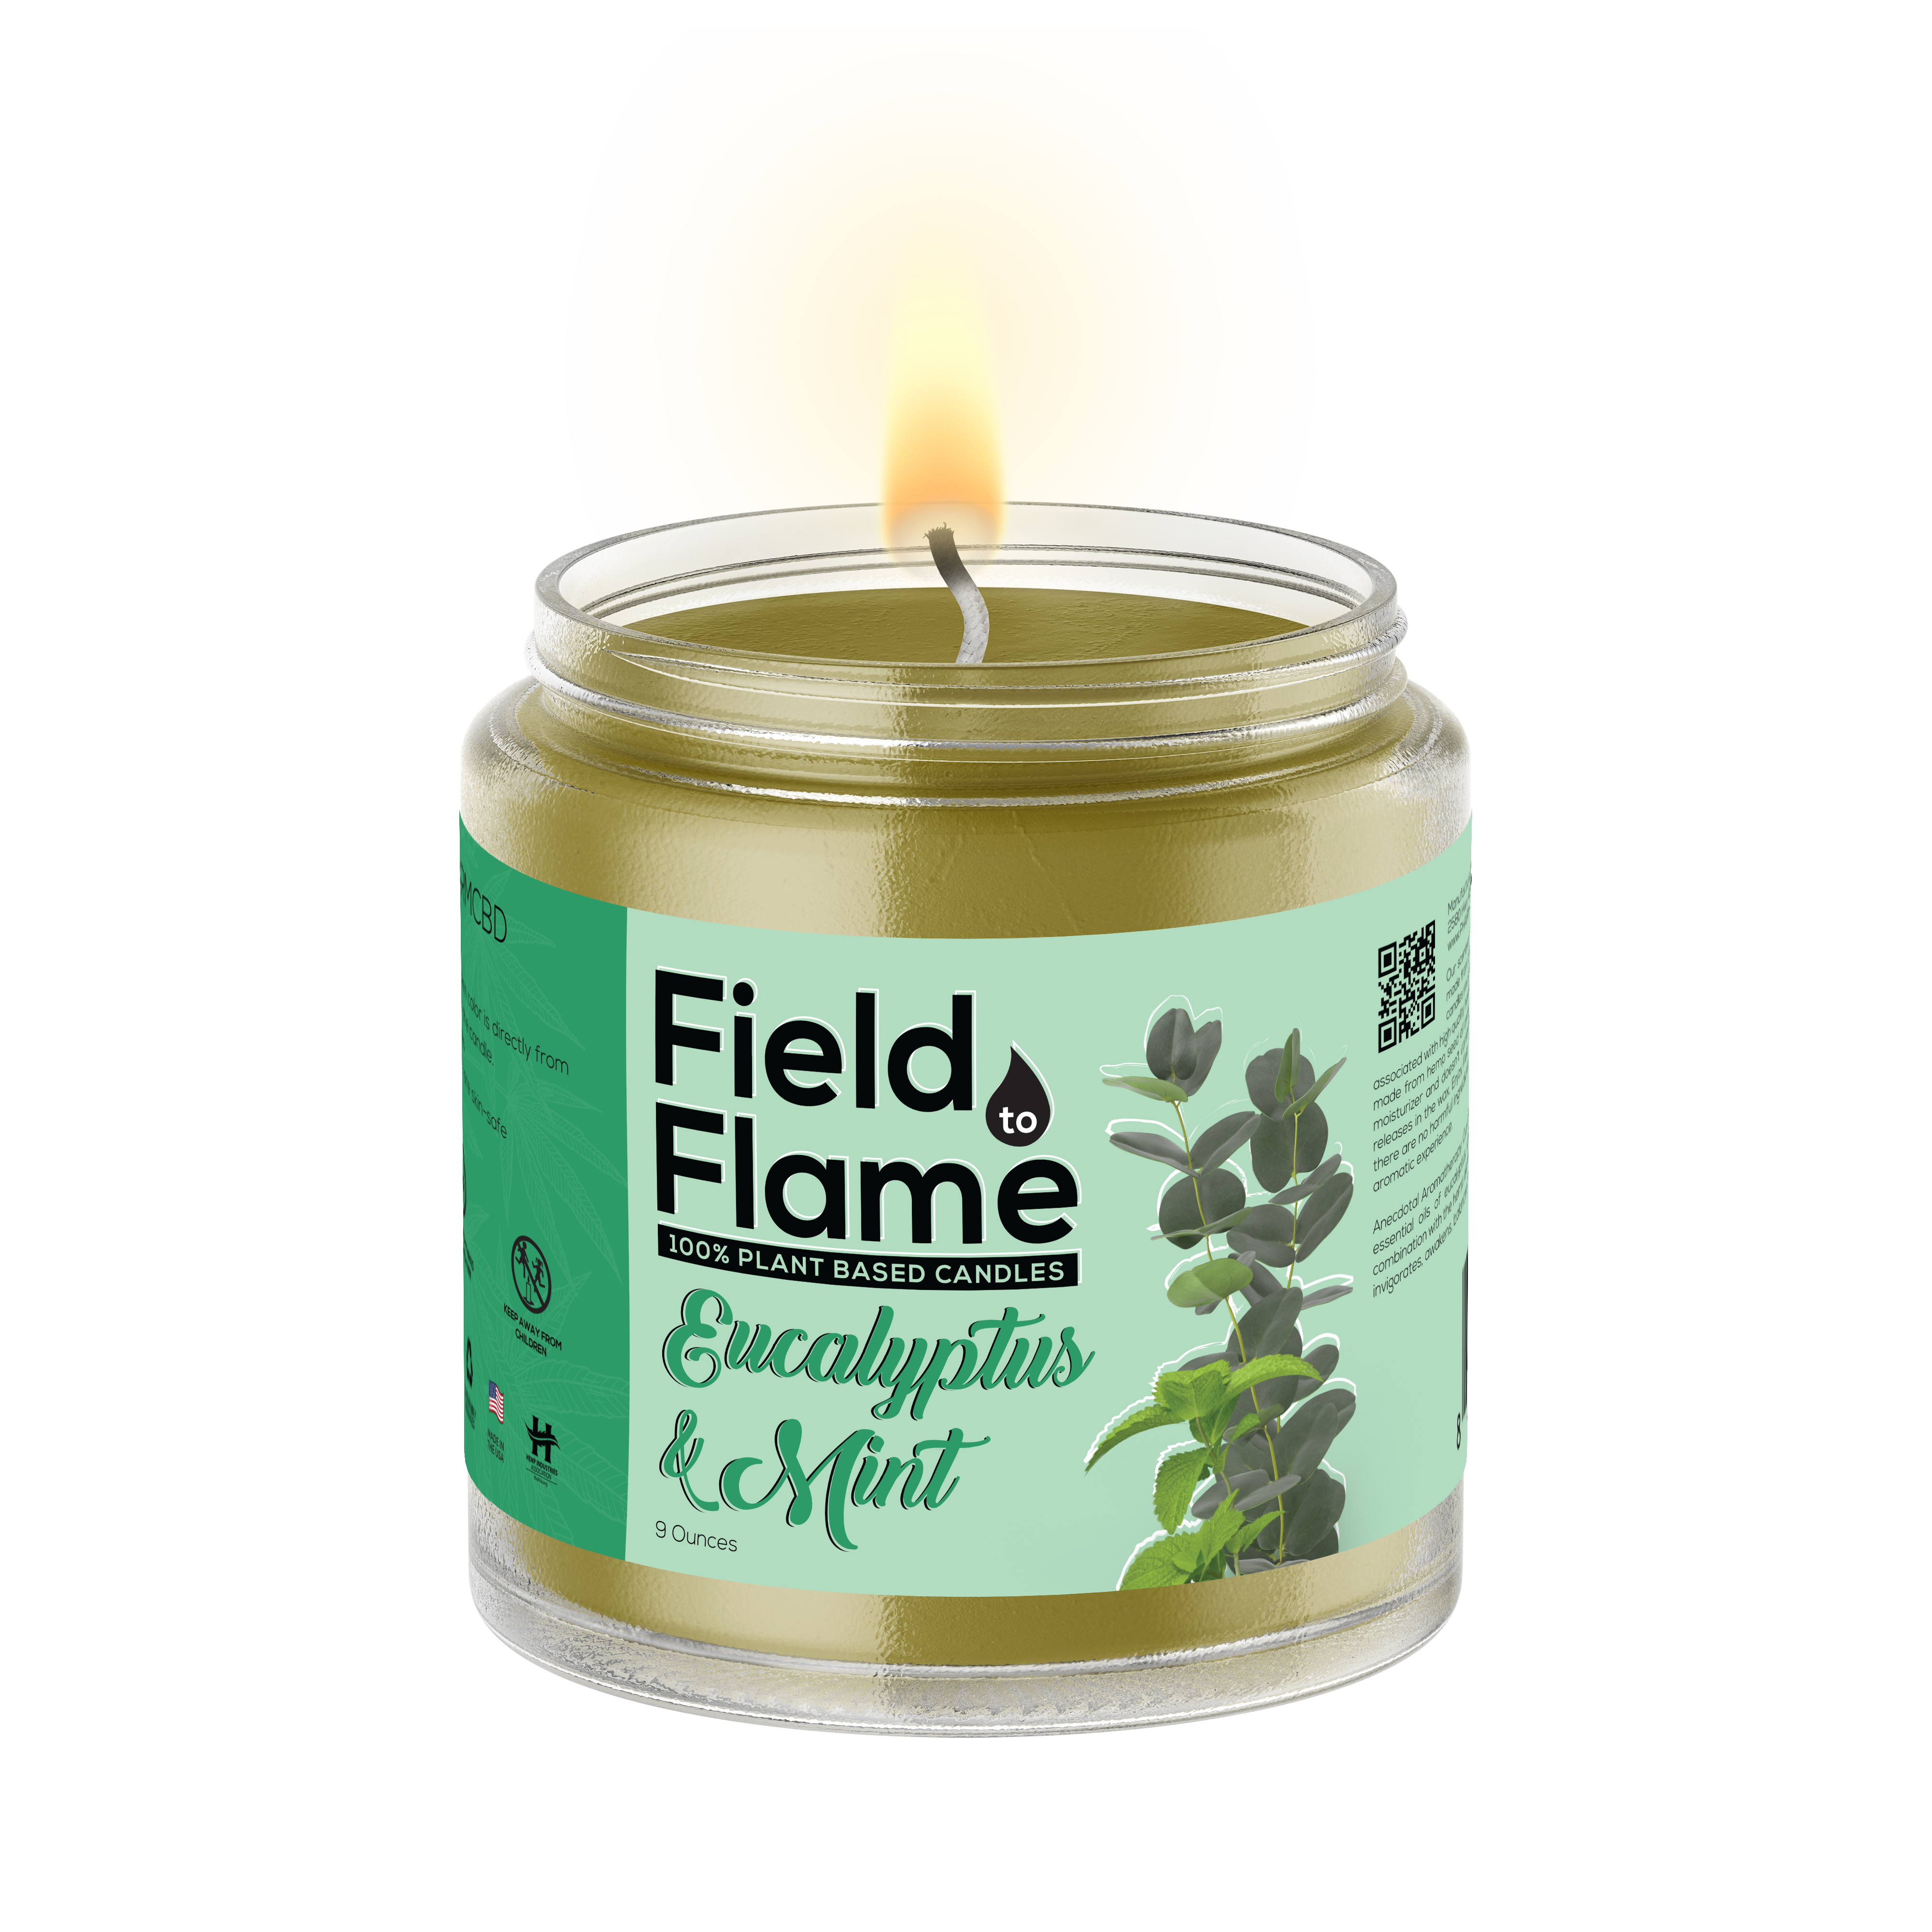 Plant-Based Candles